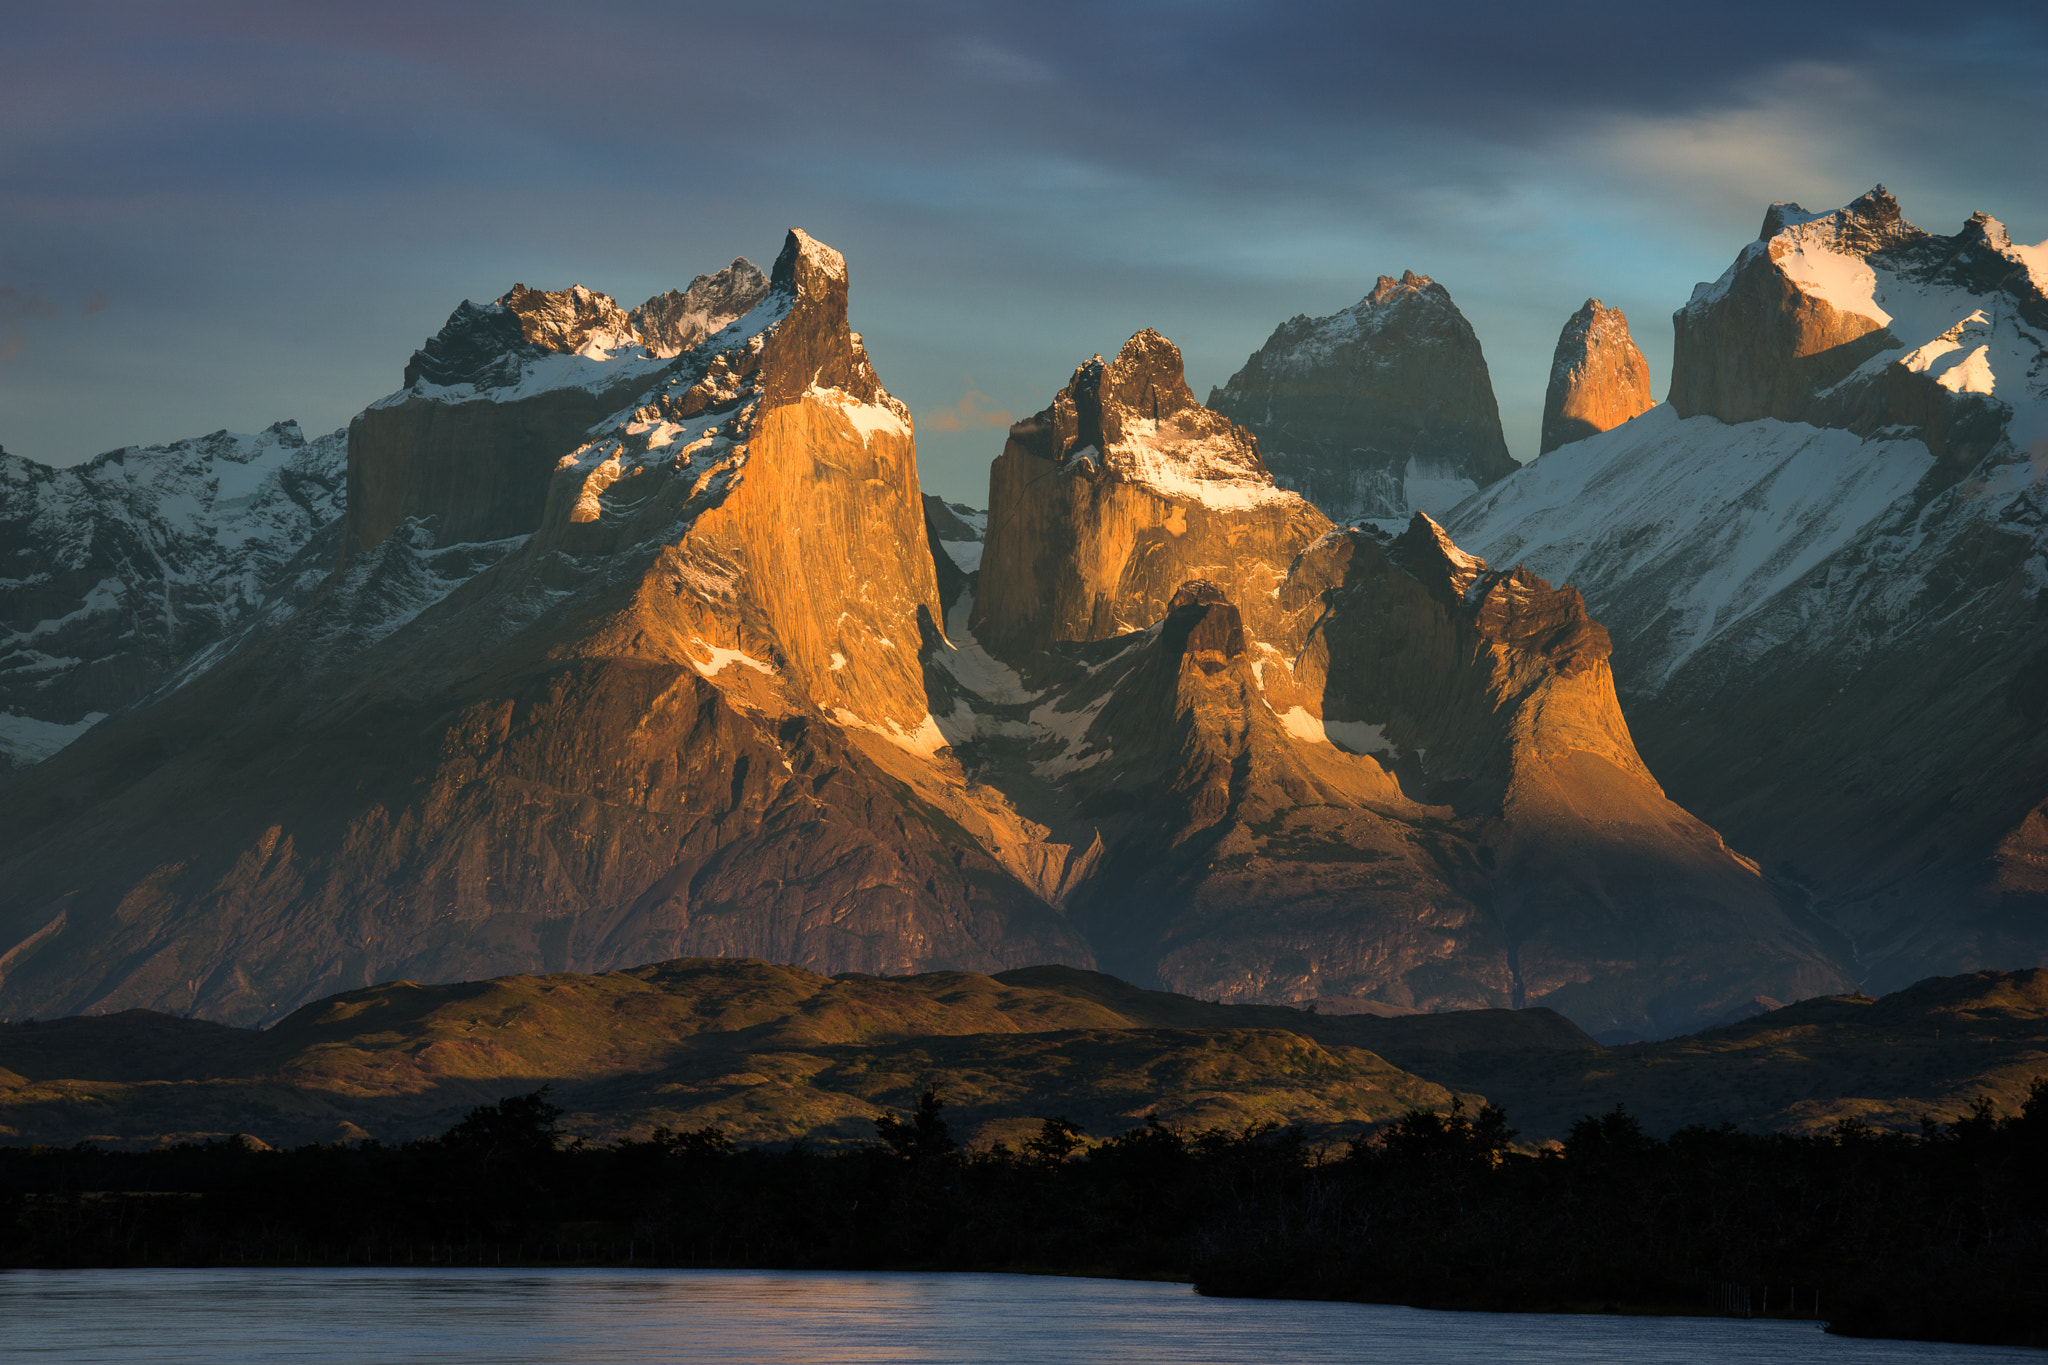 Sony a99 II sample photo. Cuernos del paine at sunrise photography